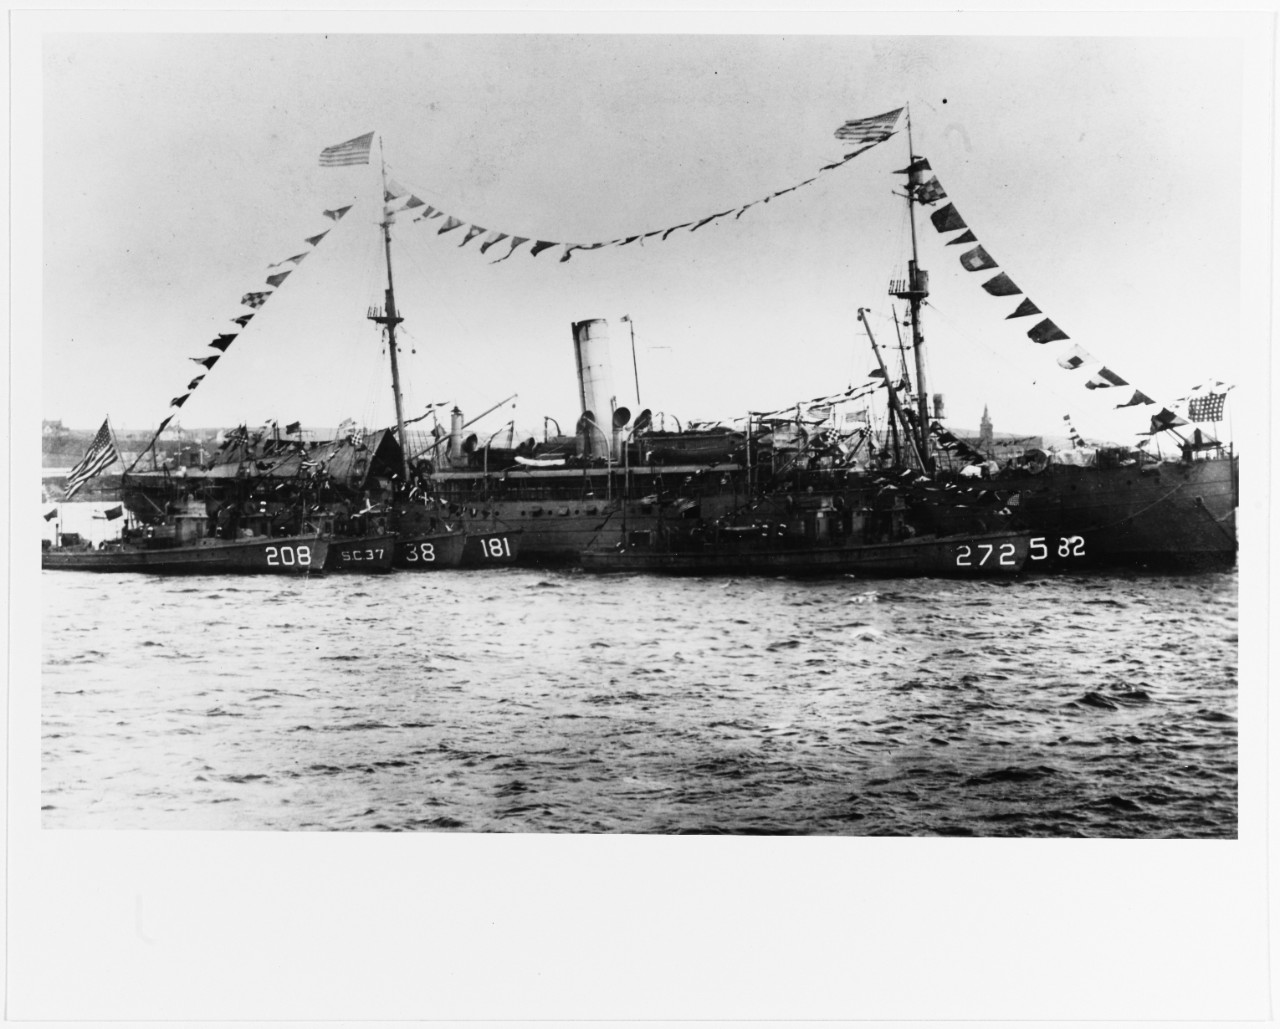 USS PANTHER (AD-6), 1898-1923